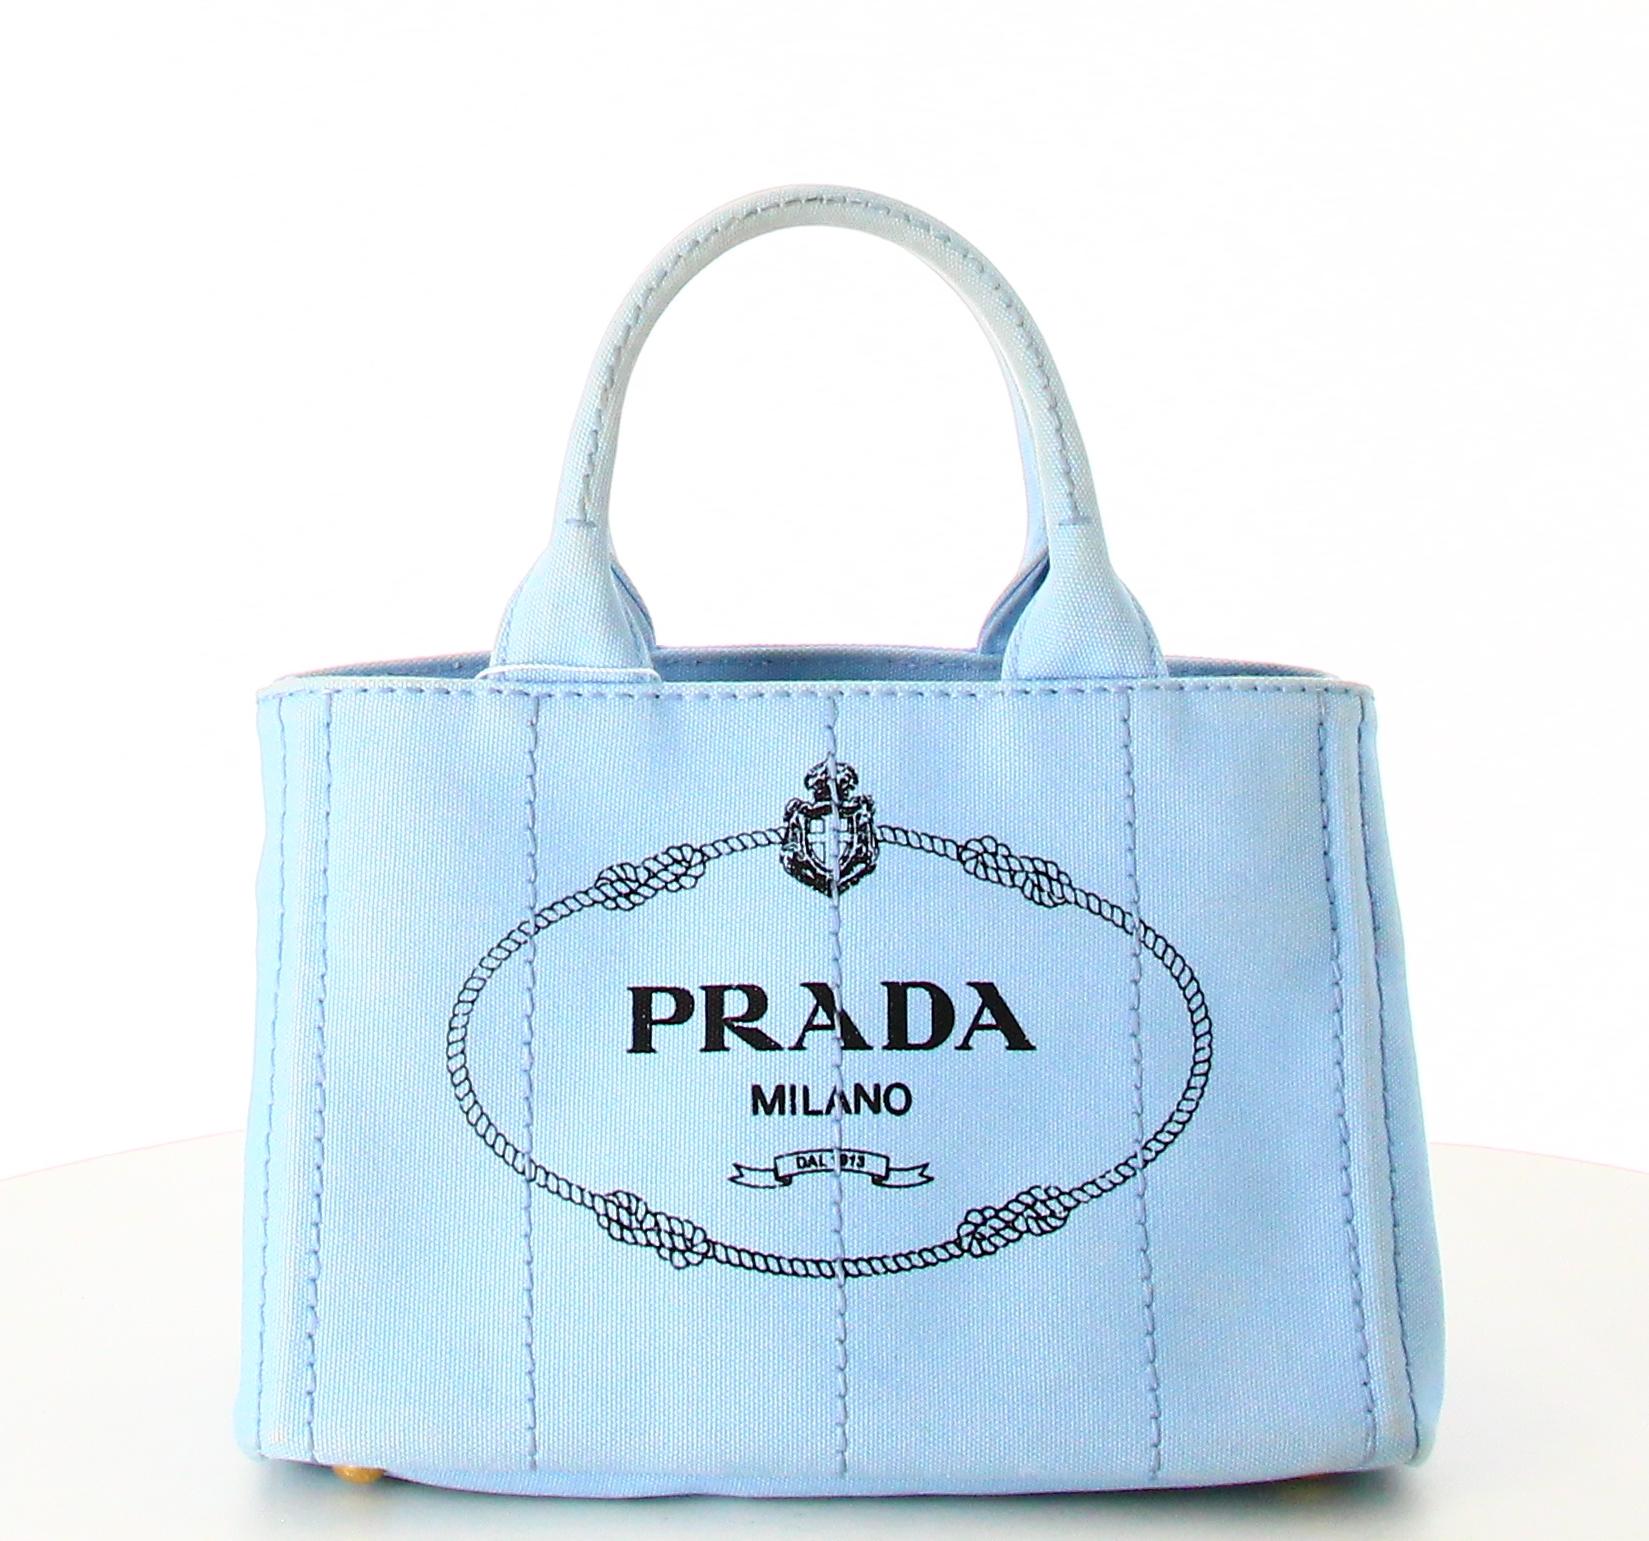 Mini Tote Bag Prada Sky Blue

- Good condition. Shows signs of wear over time.
- Prada Tote Bag
- Sky blue fabric 
- Prada logo on front 
- Two small straps plus a long shoulder strap 
- Inside: Lined fabric plus inside pockets